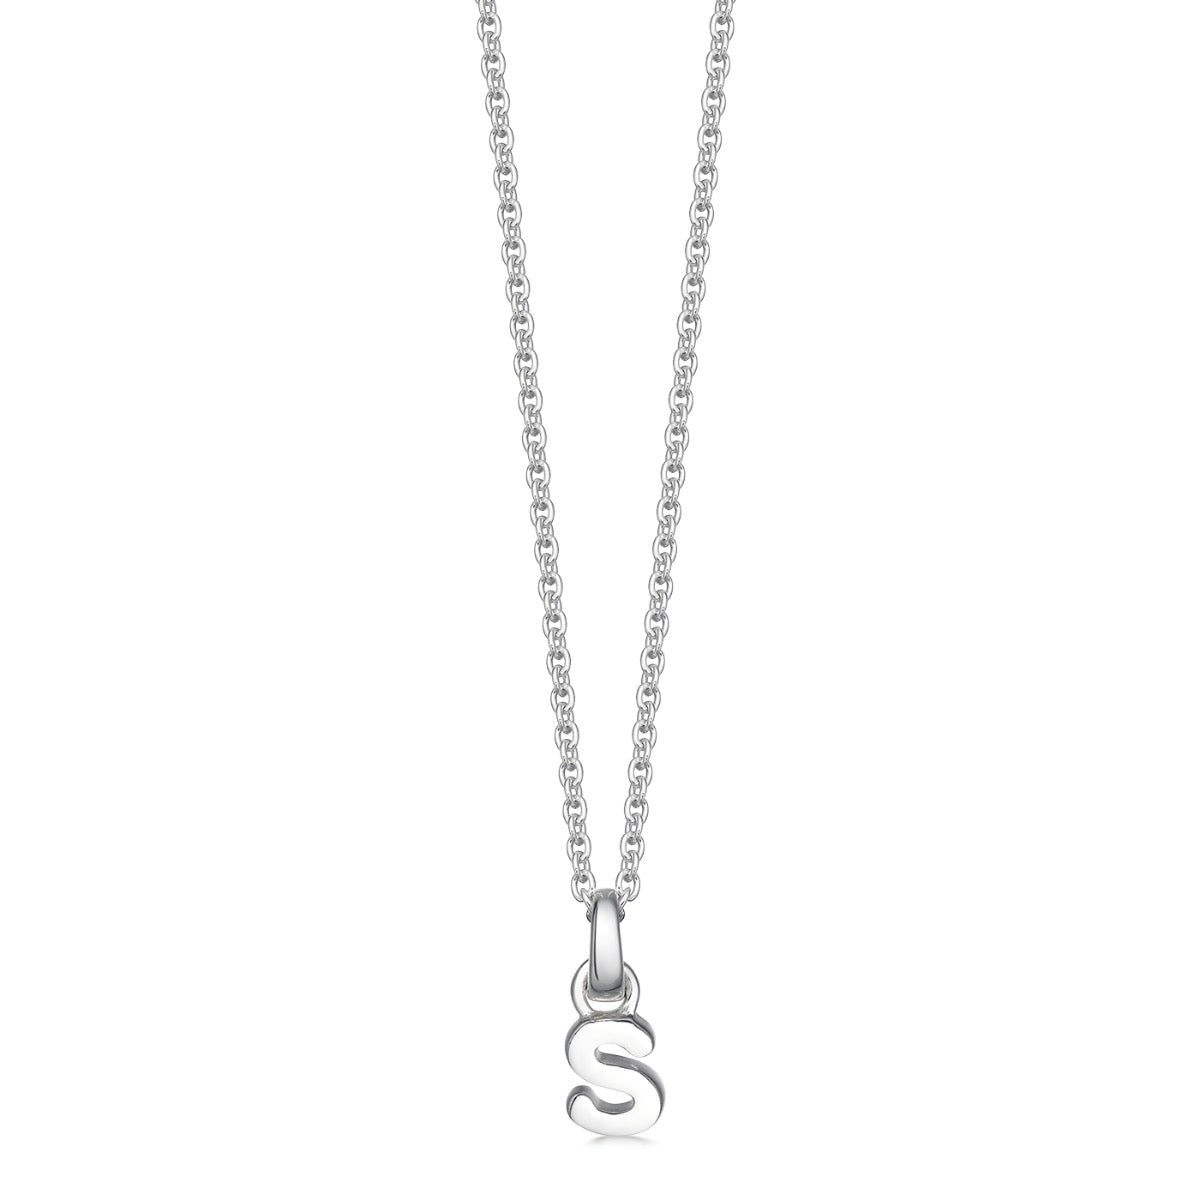 Mini Silver Letter "S" Initial Necklace